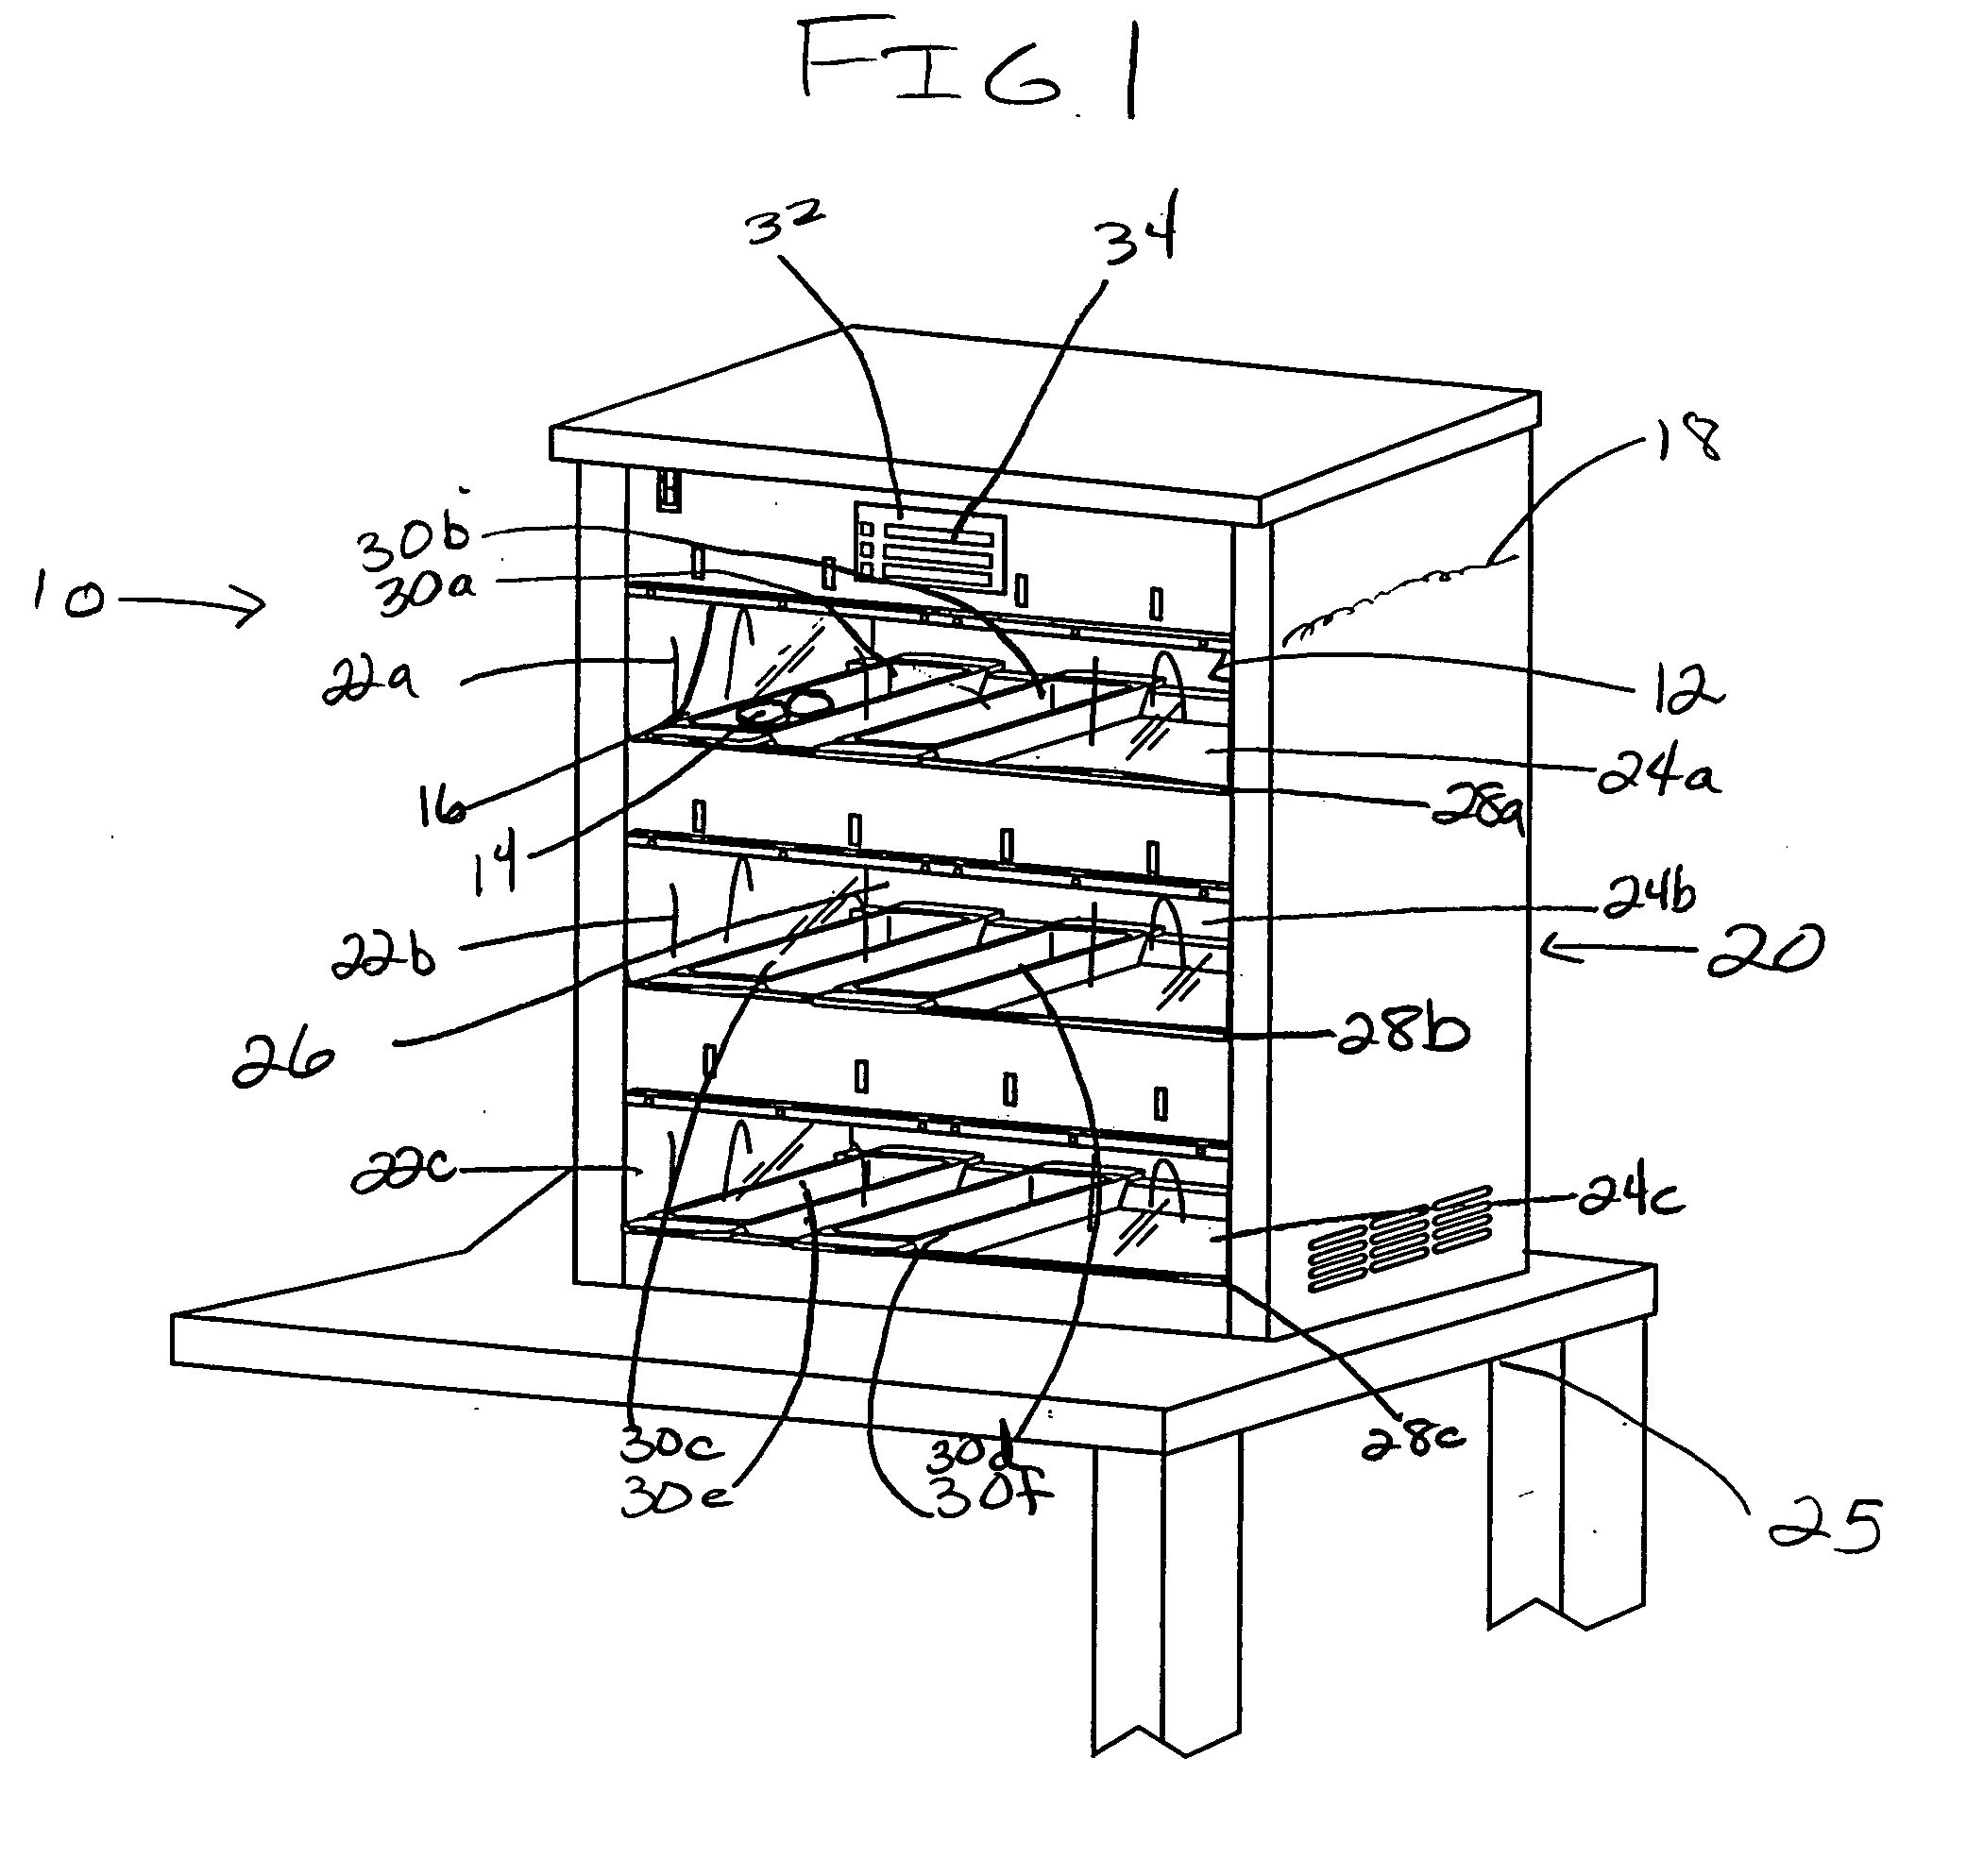 Food staging device